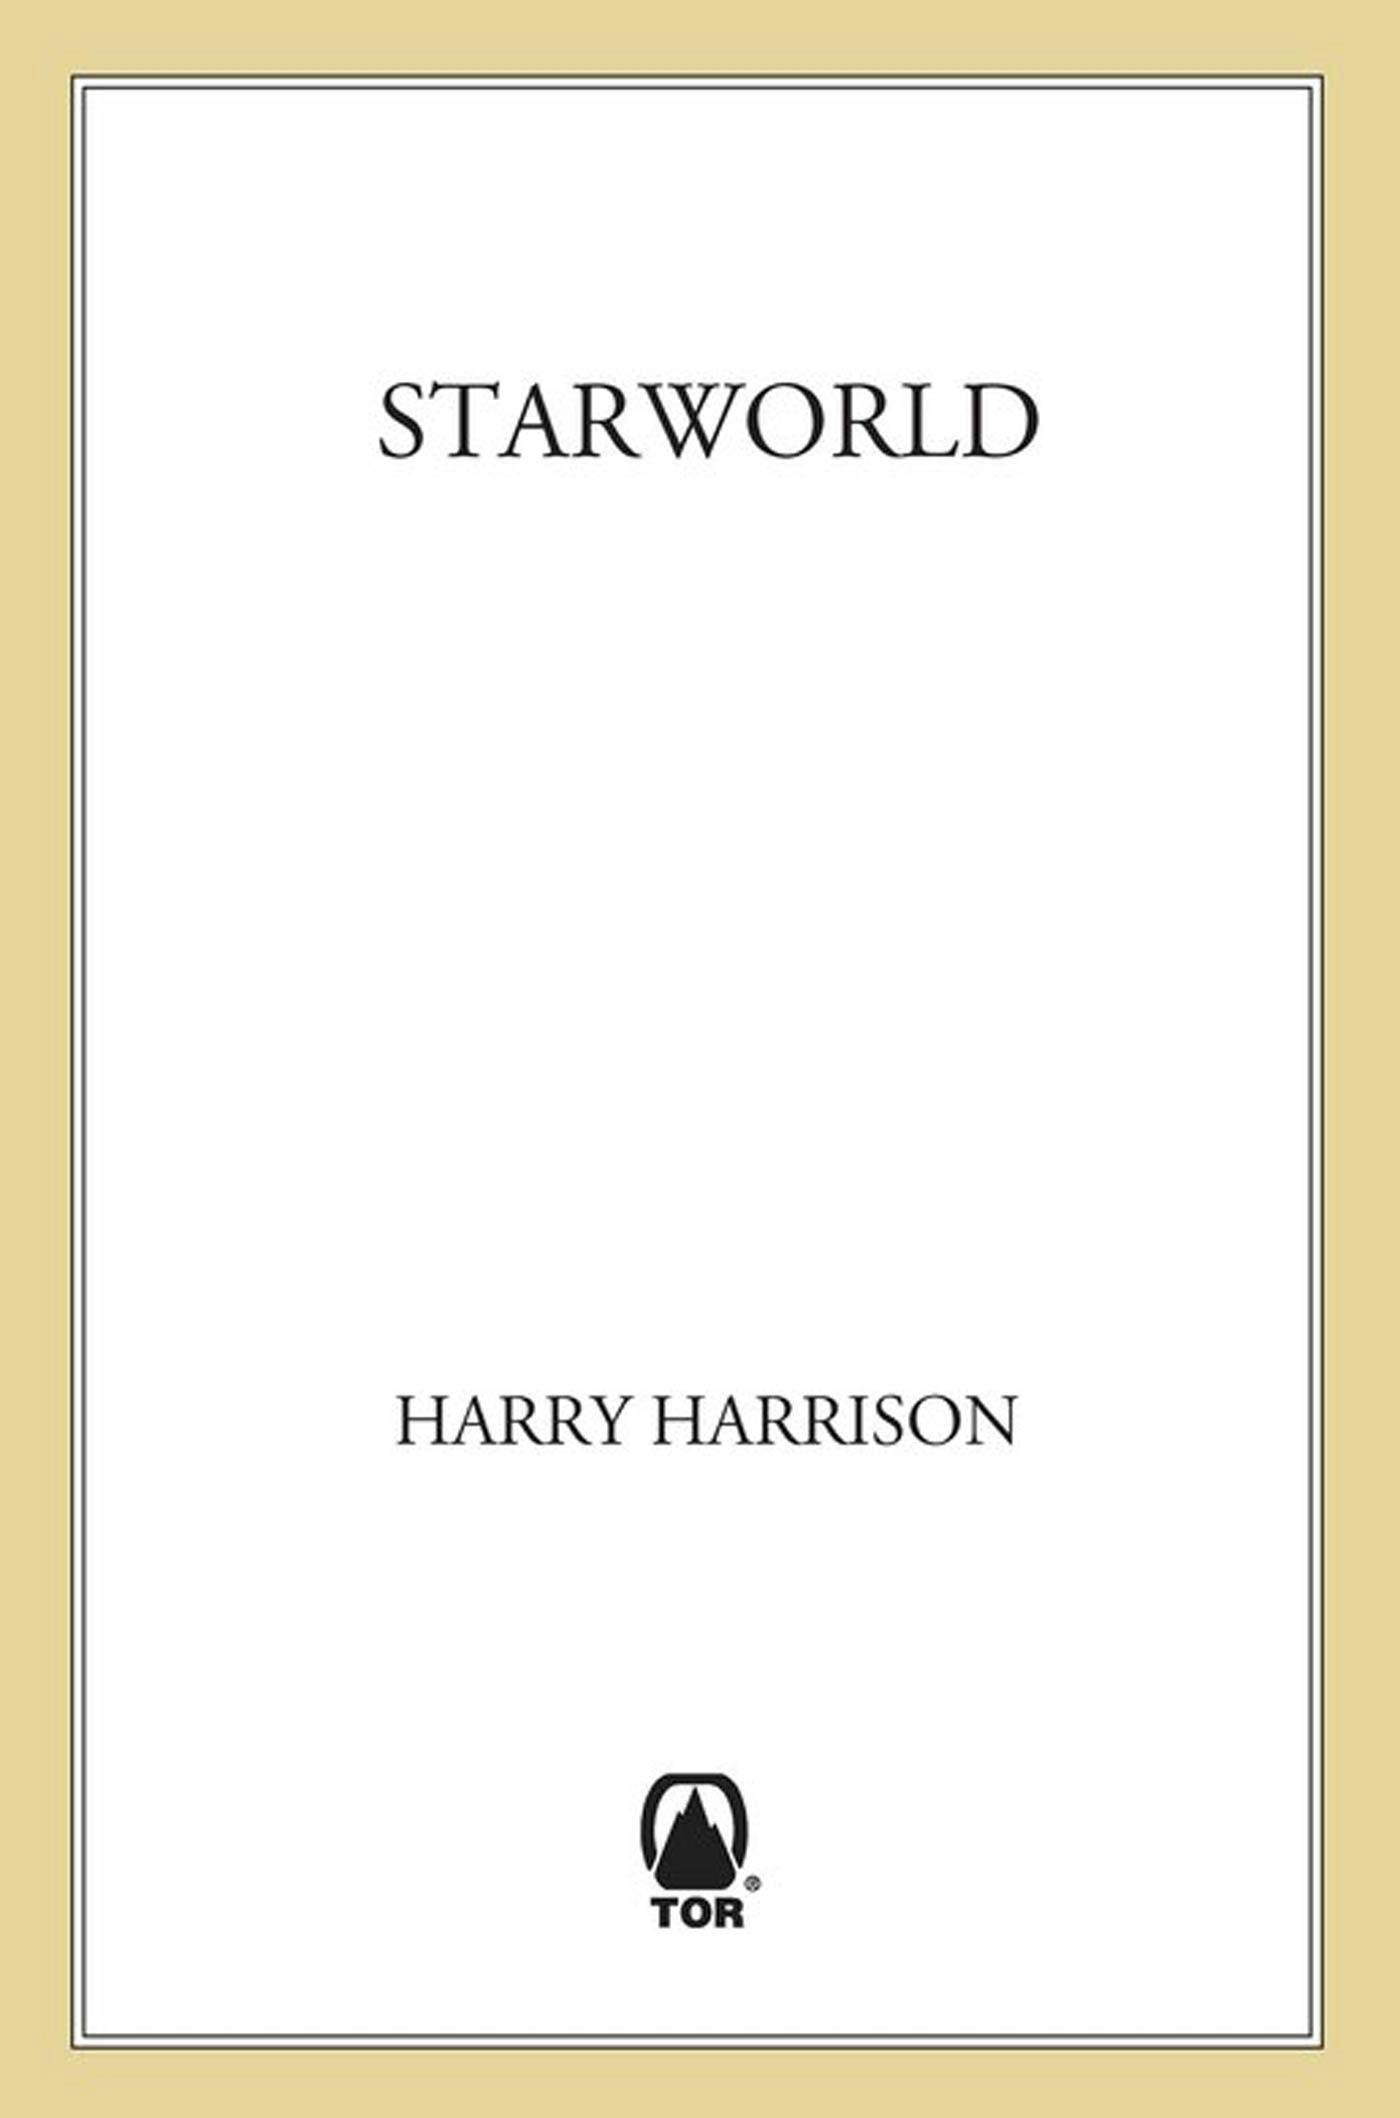 Cover for the book titled as: Starworld